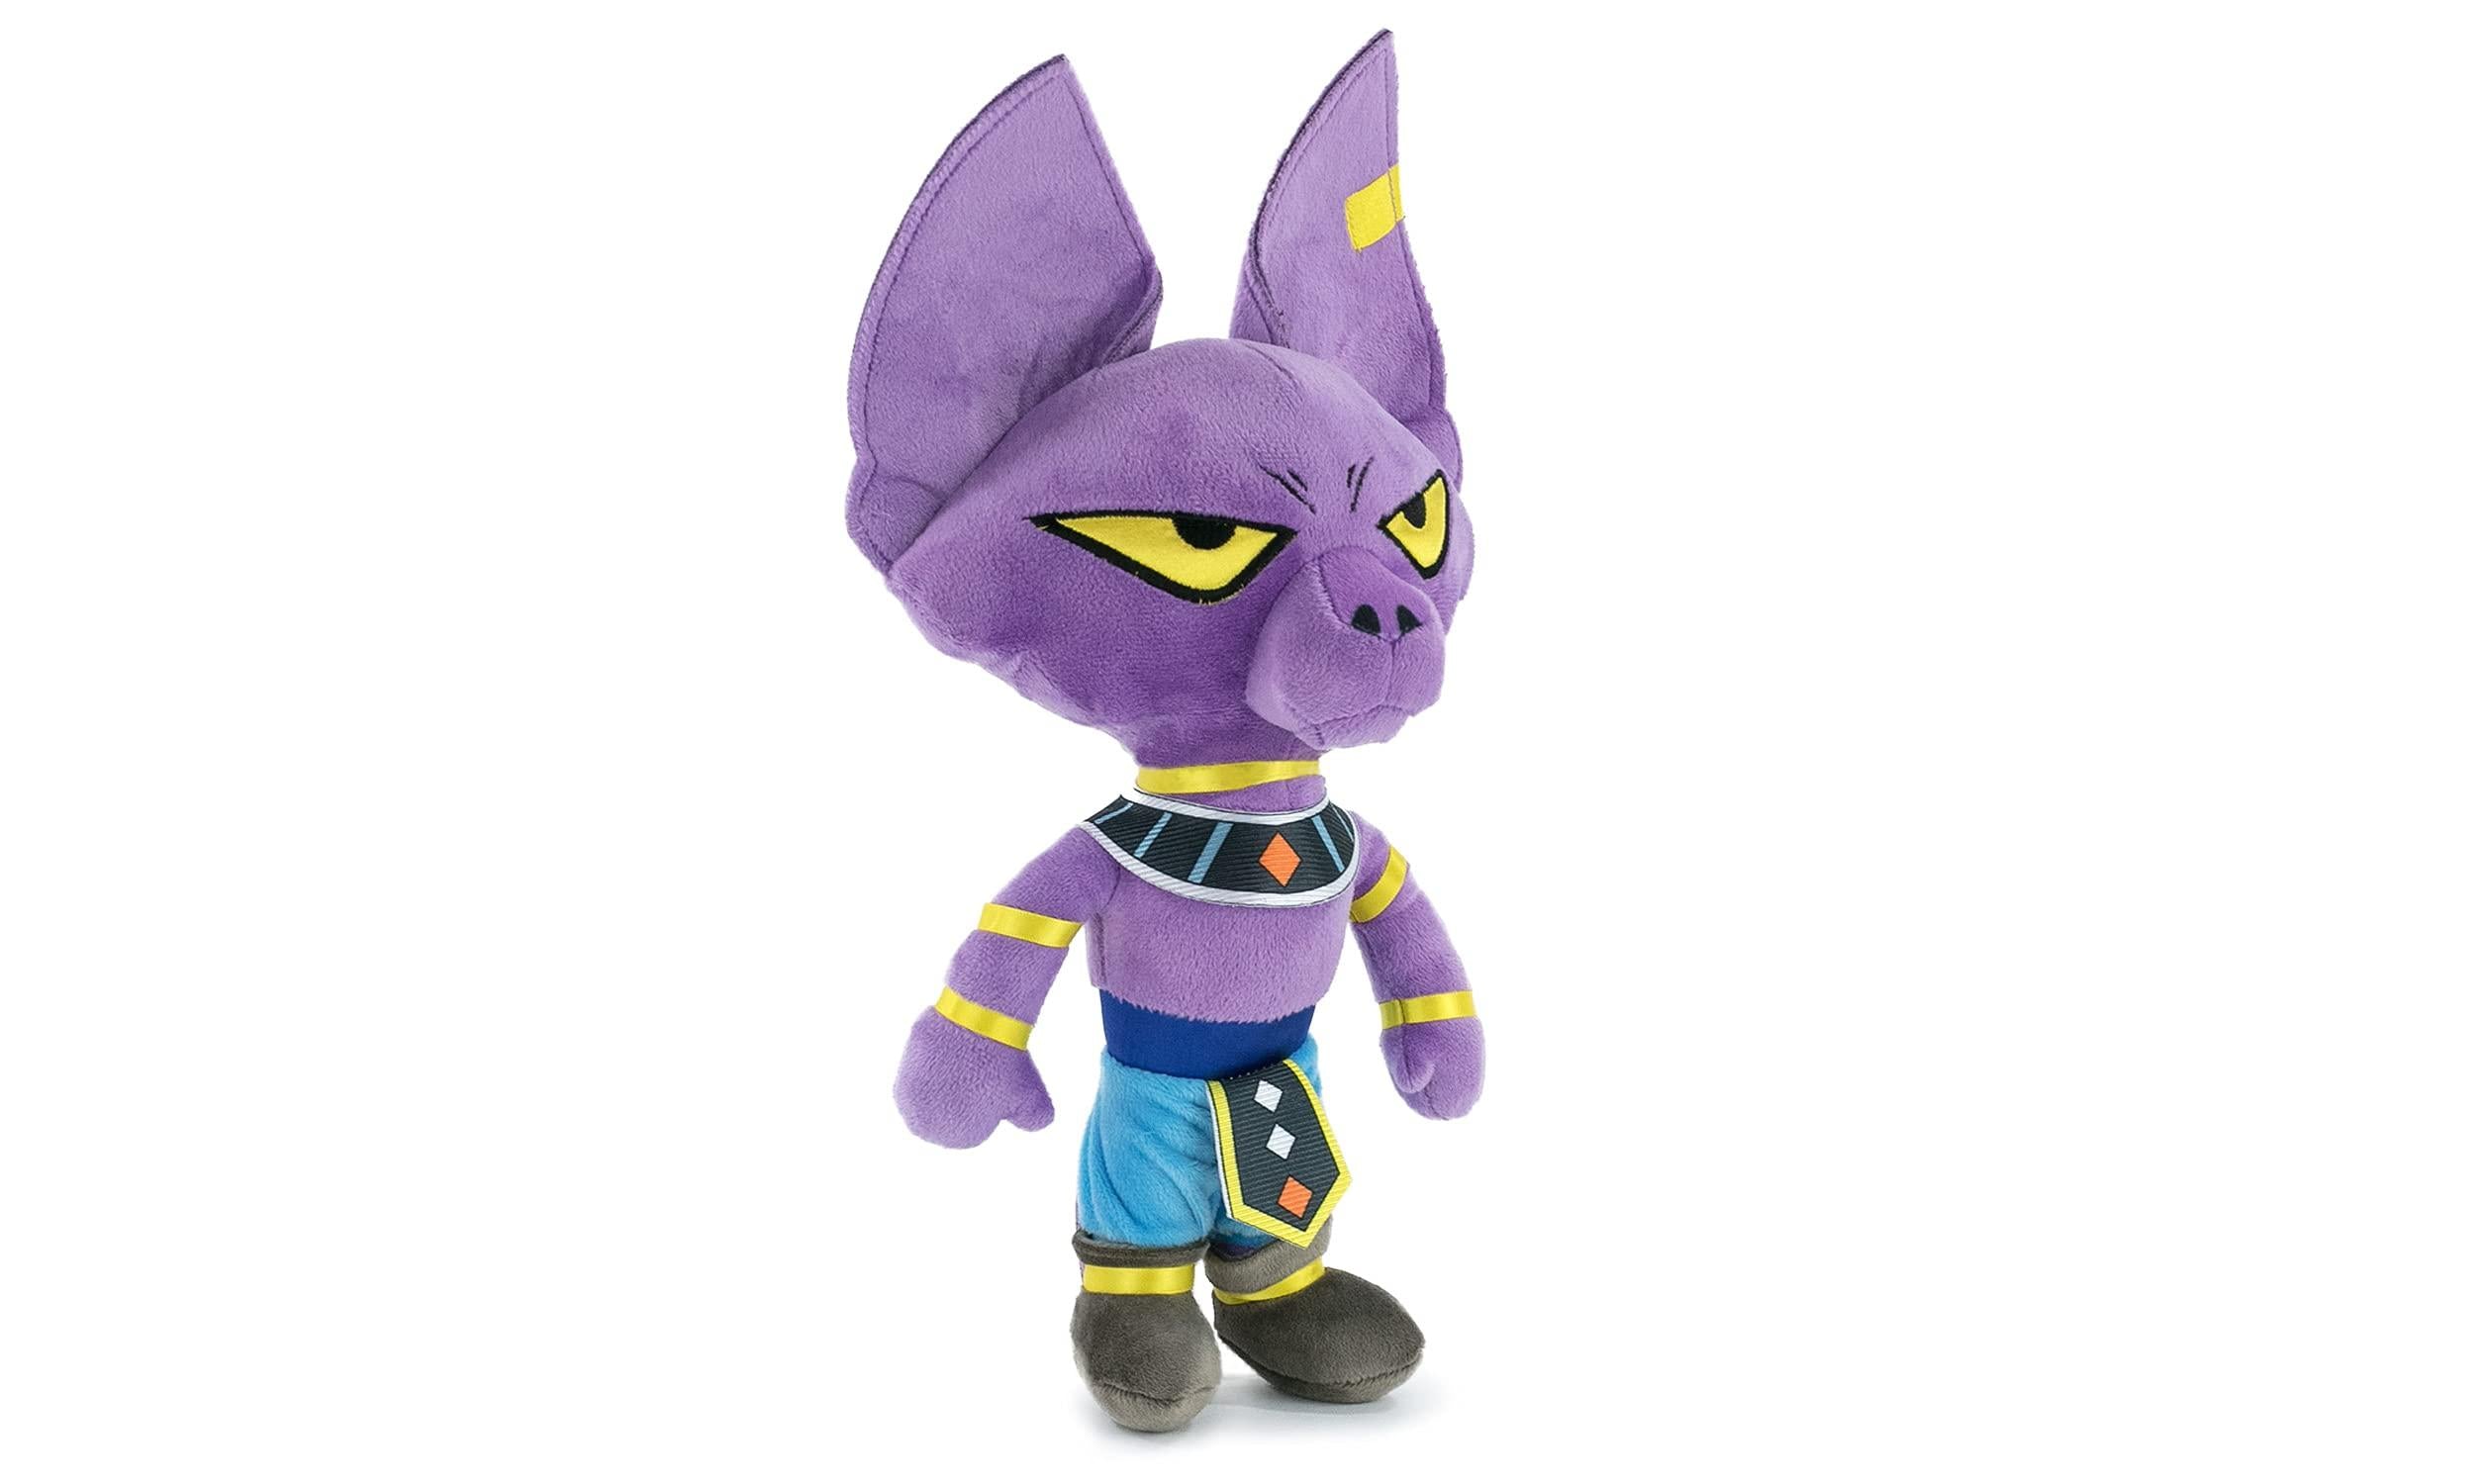 Play by Play Dragon Ball Z Super Protagonists Plushies BEERUS Soft Plush Toy